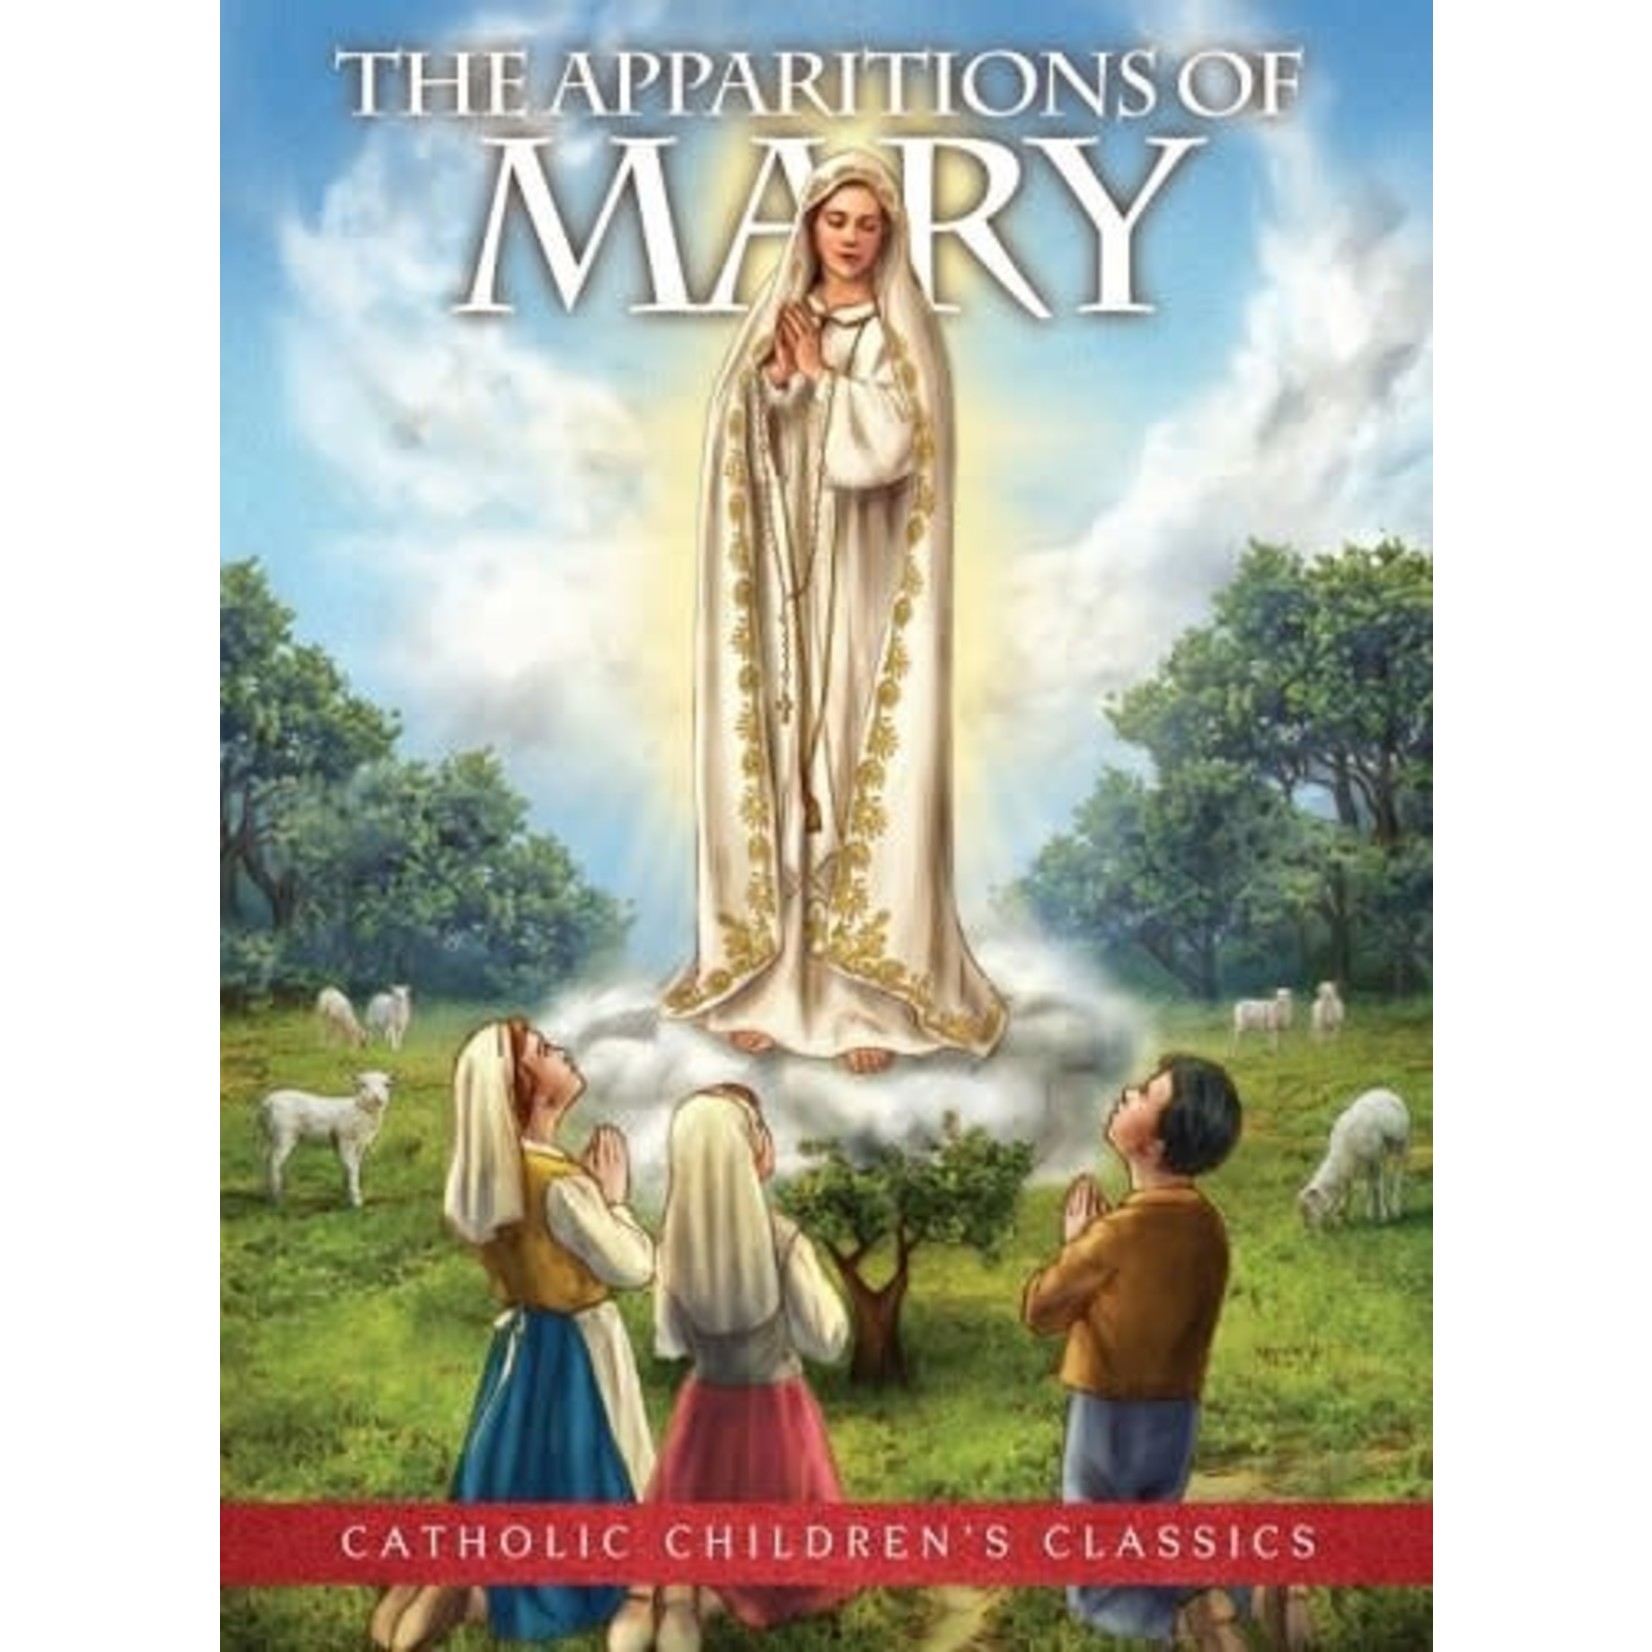 The Apparitions of Mary Catholic Children’s Classic